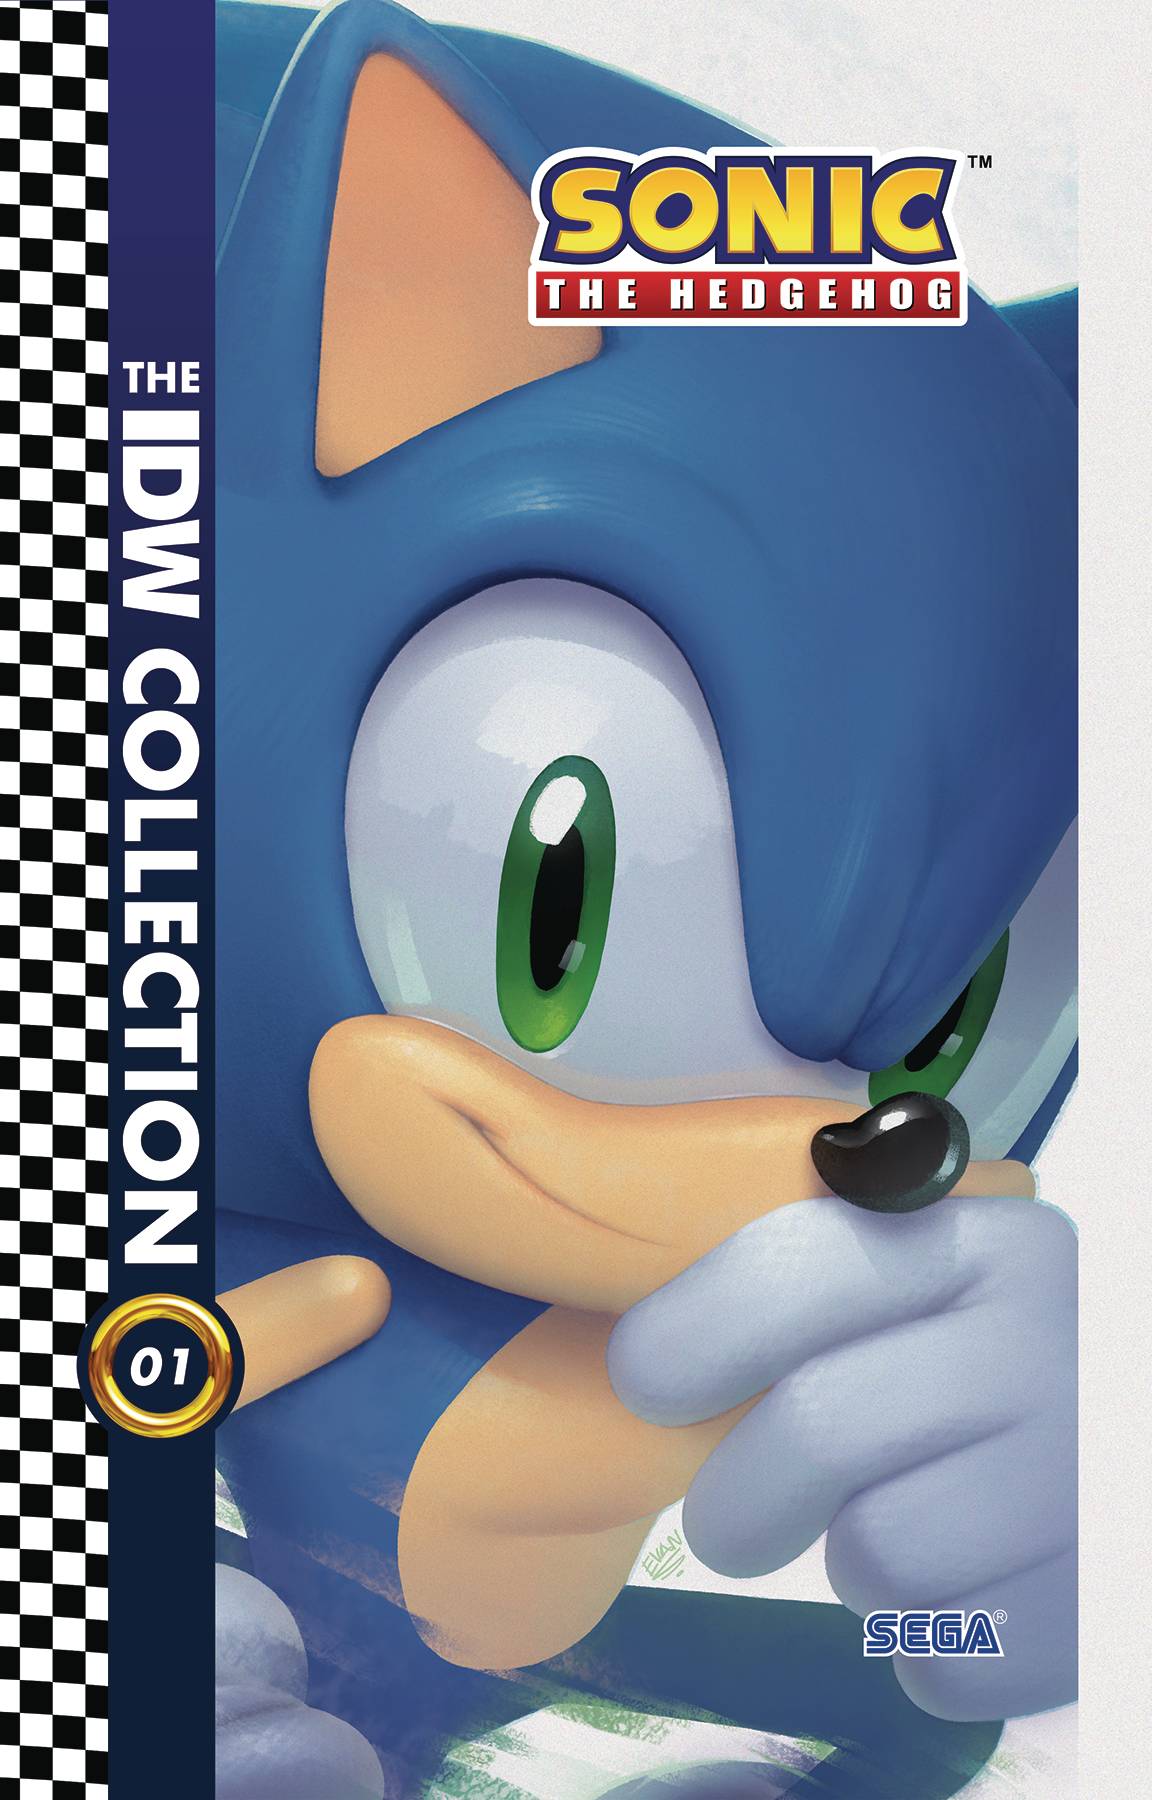 SONIC THE HEDGEHOG IDW COLLECTION HC 01